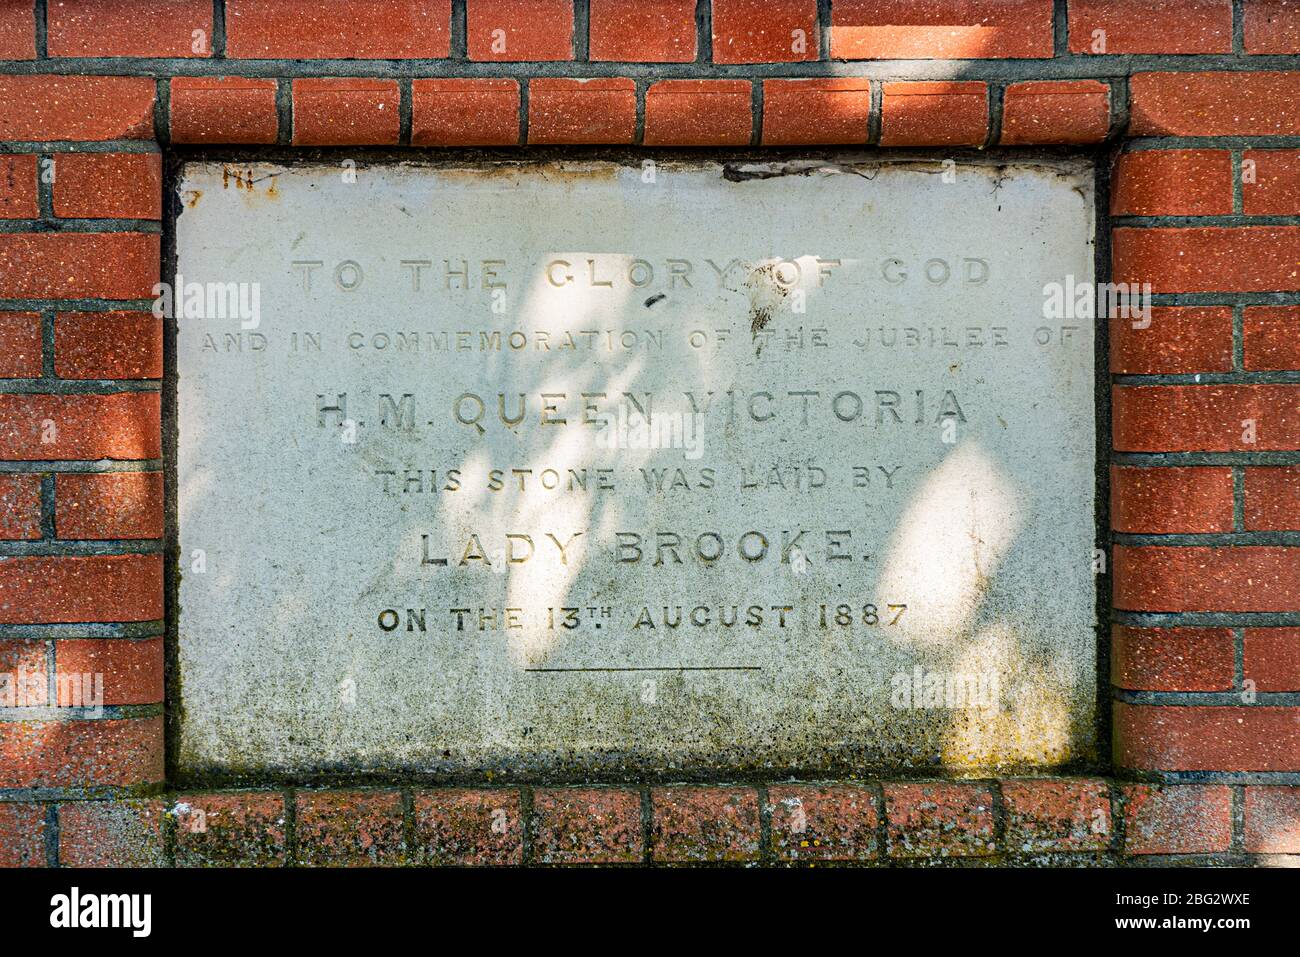 Stone laid by Lady Brooke at Southend Hospital in 1887, in Westcliff, Southend on Sea, Essex, UK. Commemorating Queen Victoria's golden jubilee Stock Photo